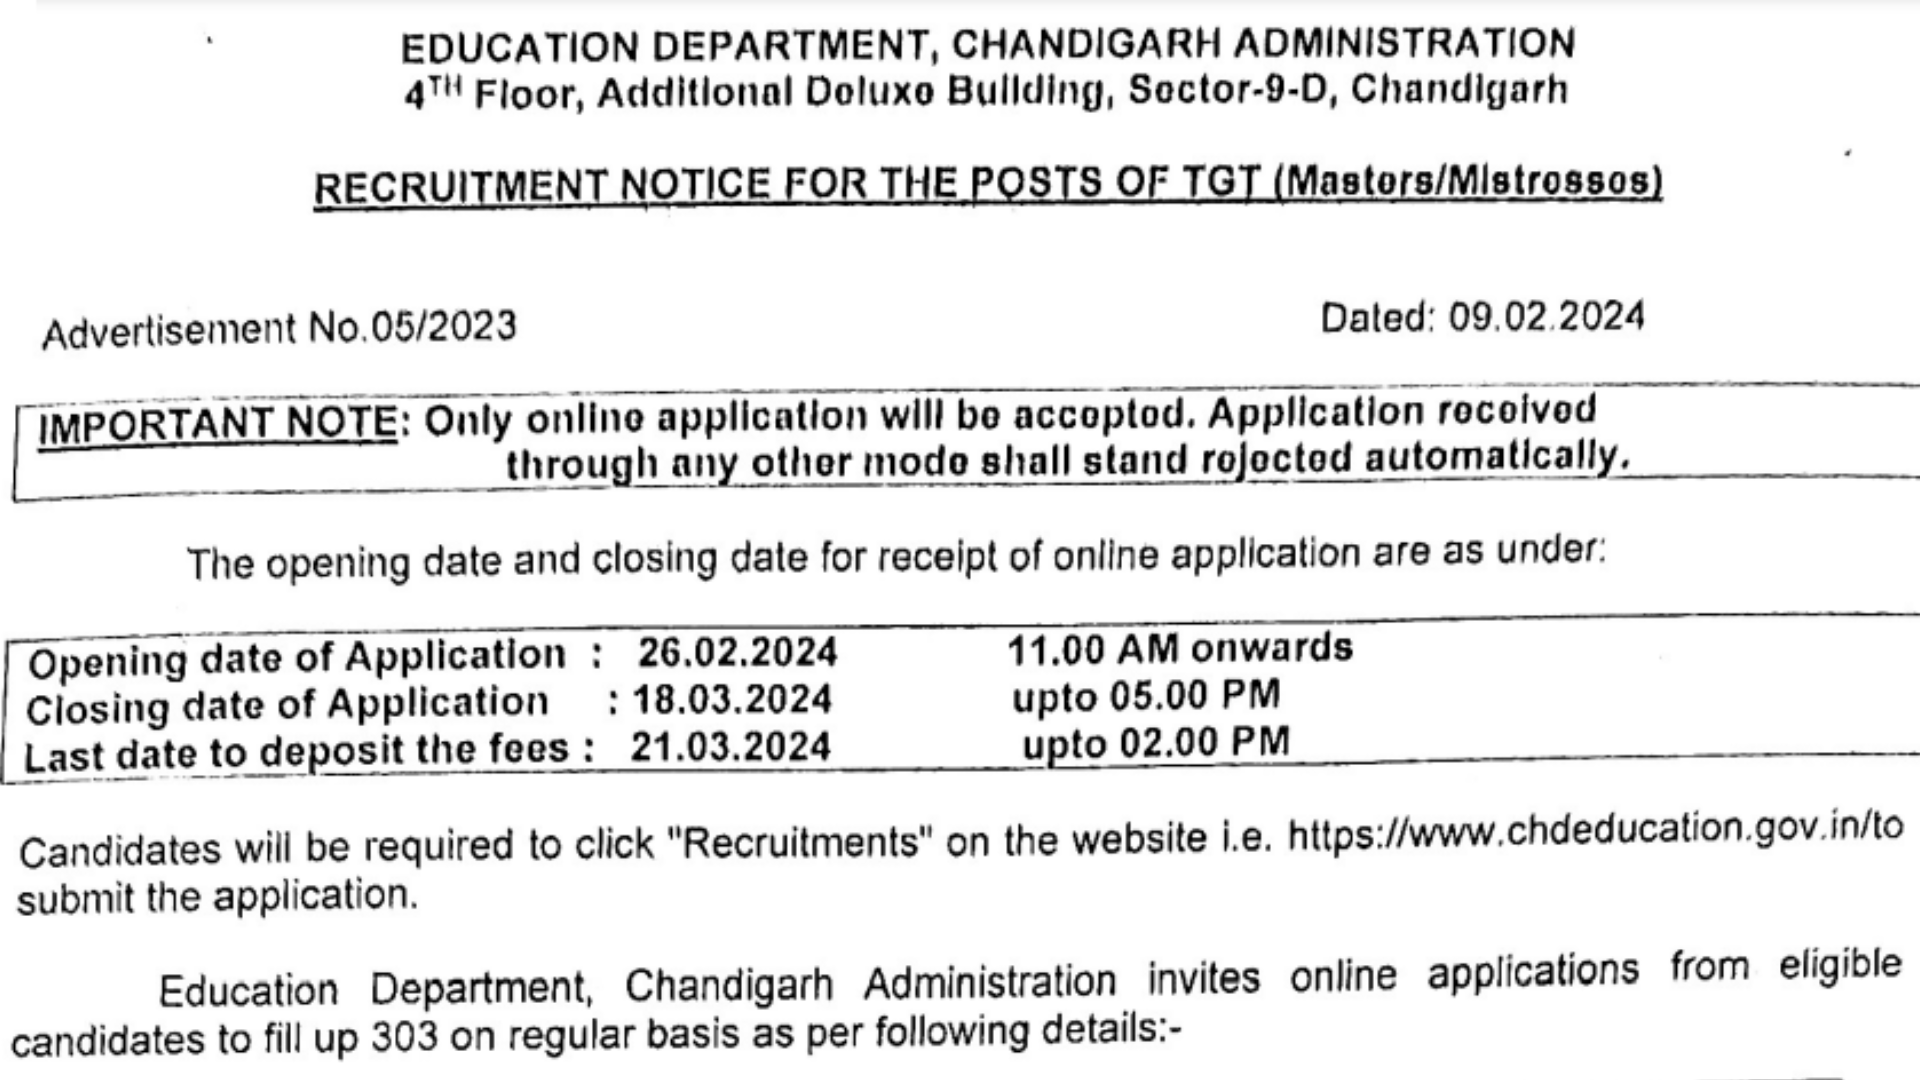 Chandigarh TGT Recruitment 2024 [303 Post] Notification and Online Application Form